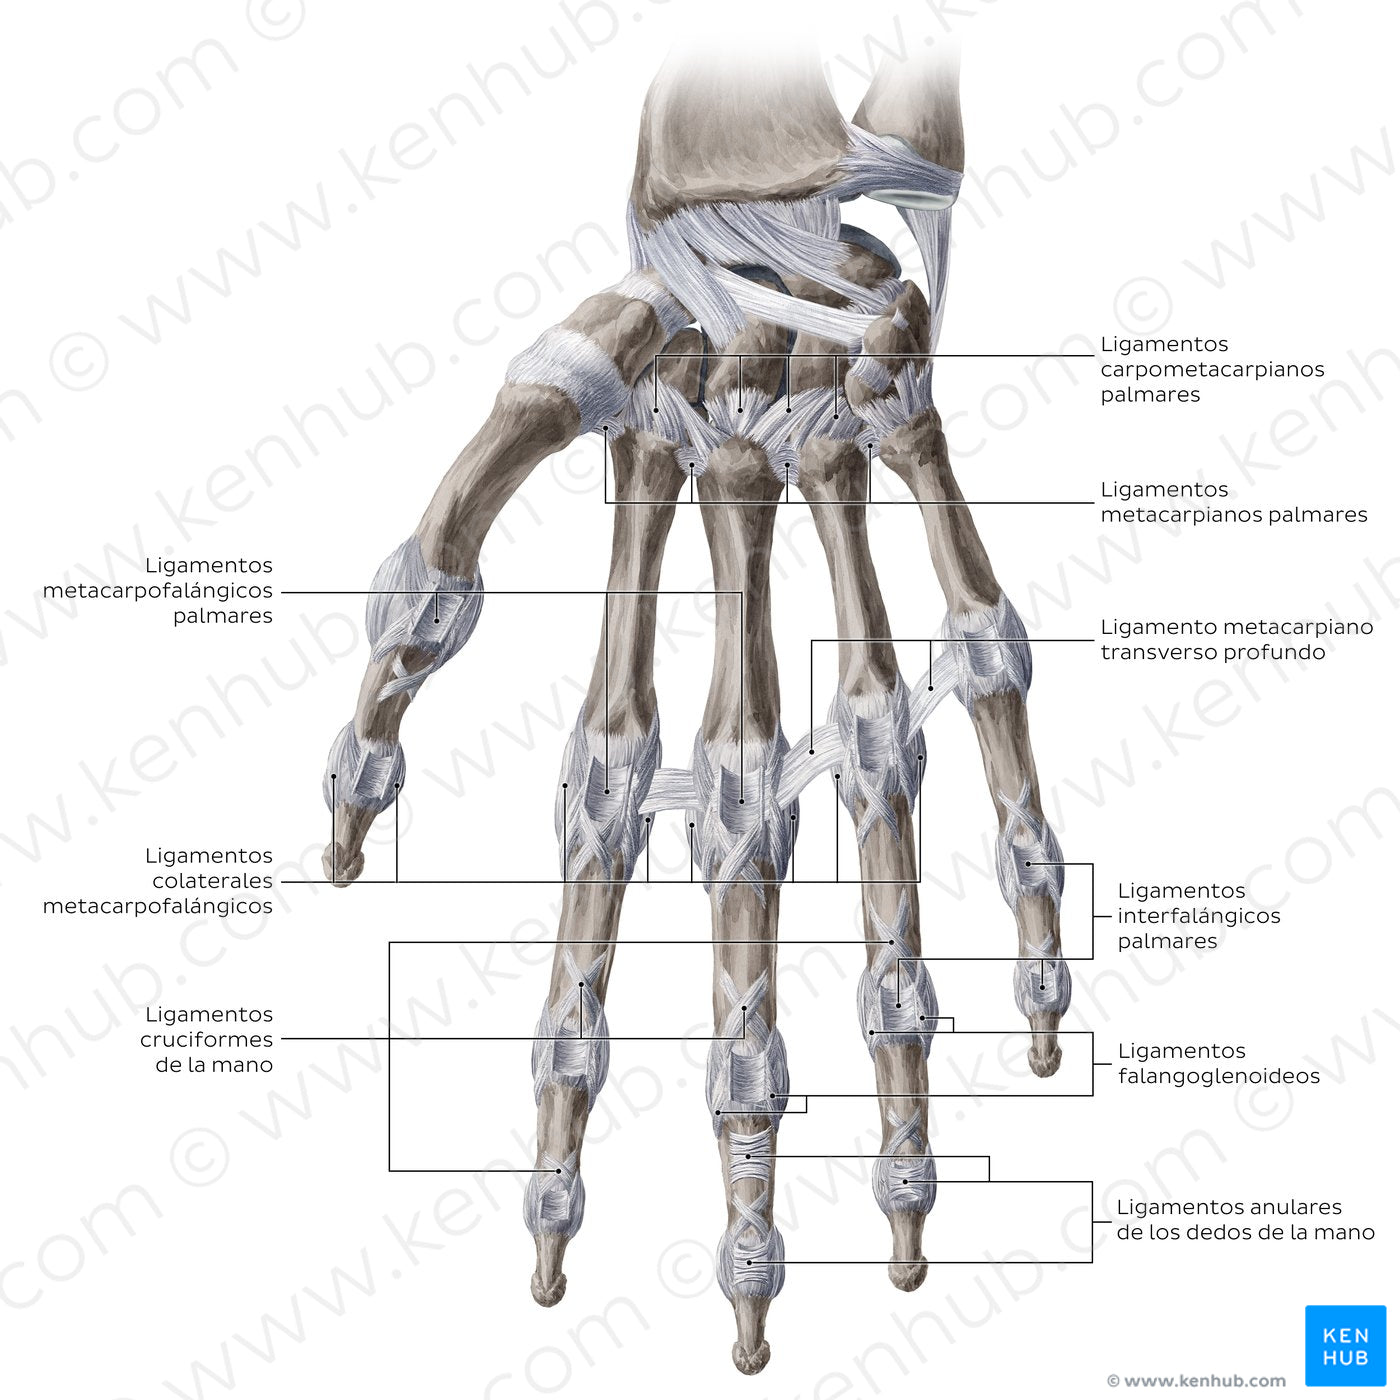 Ligaments of the metacarpals and phalanges: Palmar view (Spanish)